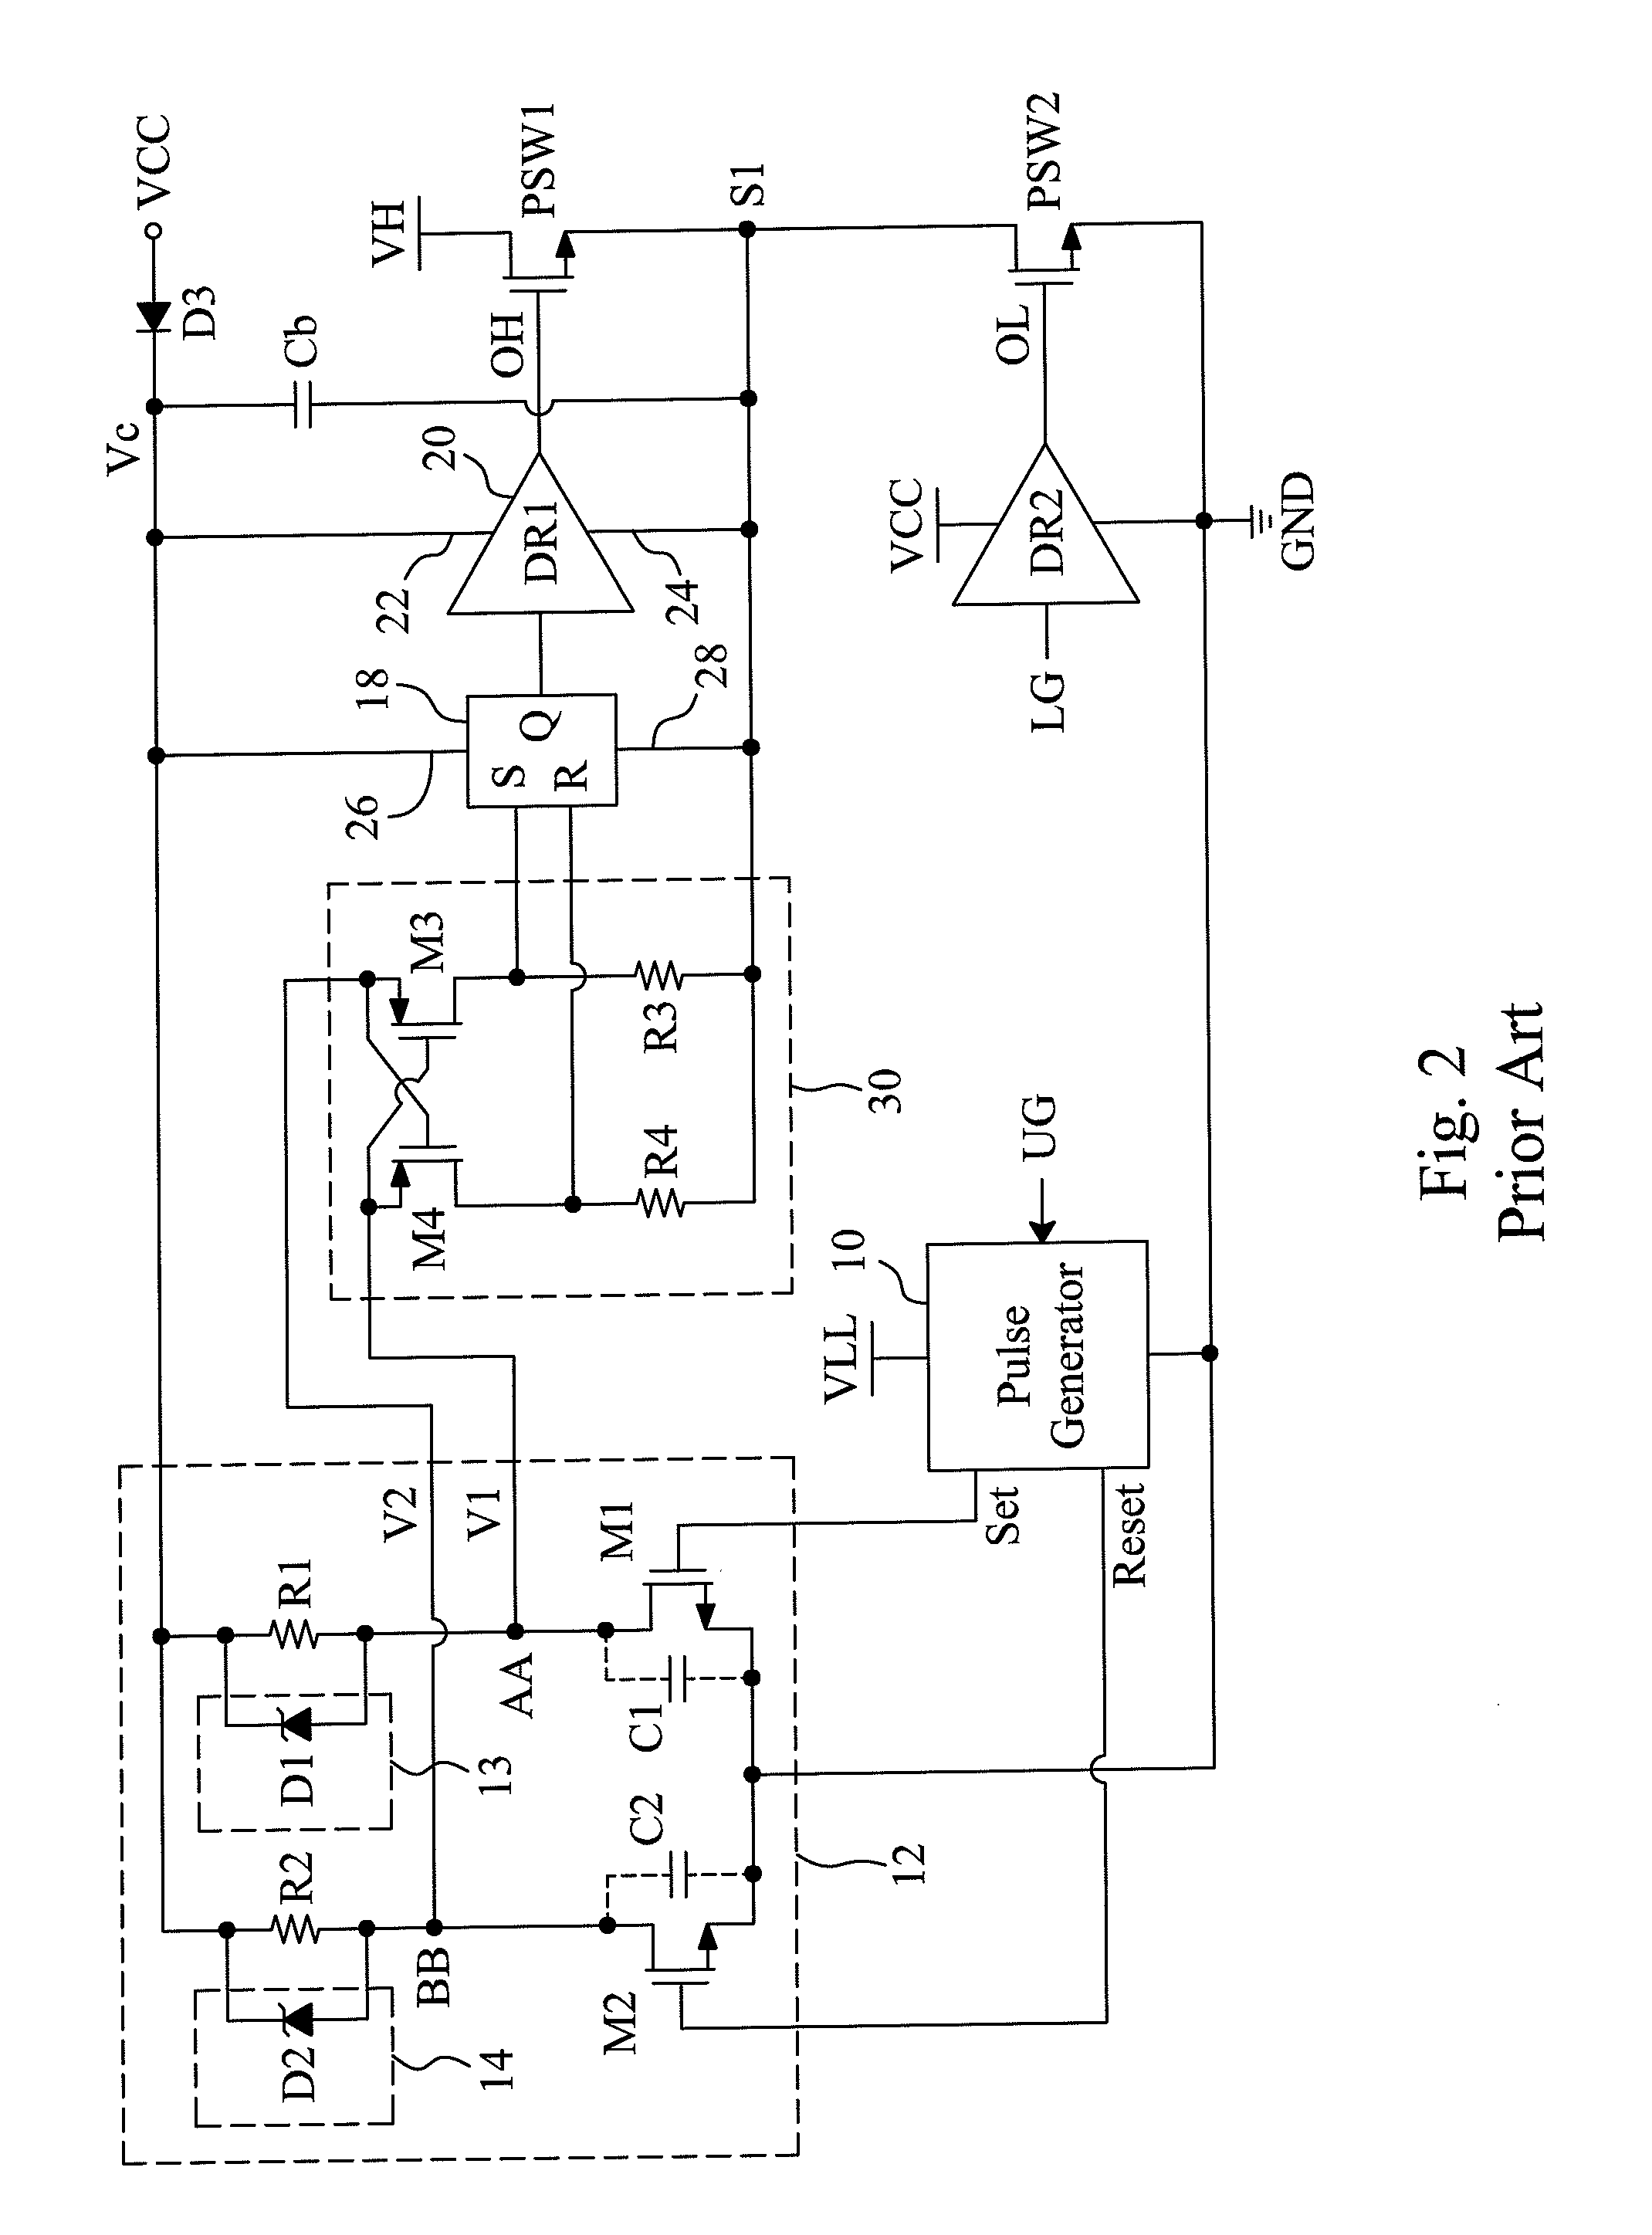 Configuration and method for improving noise immunity of a floating gate driver circuit